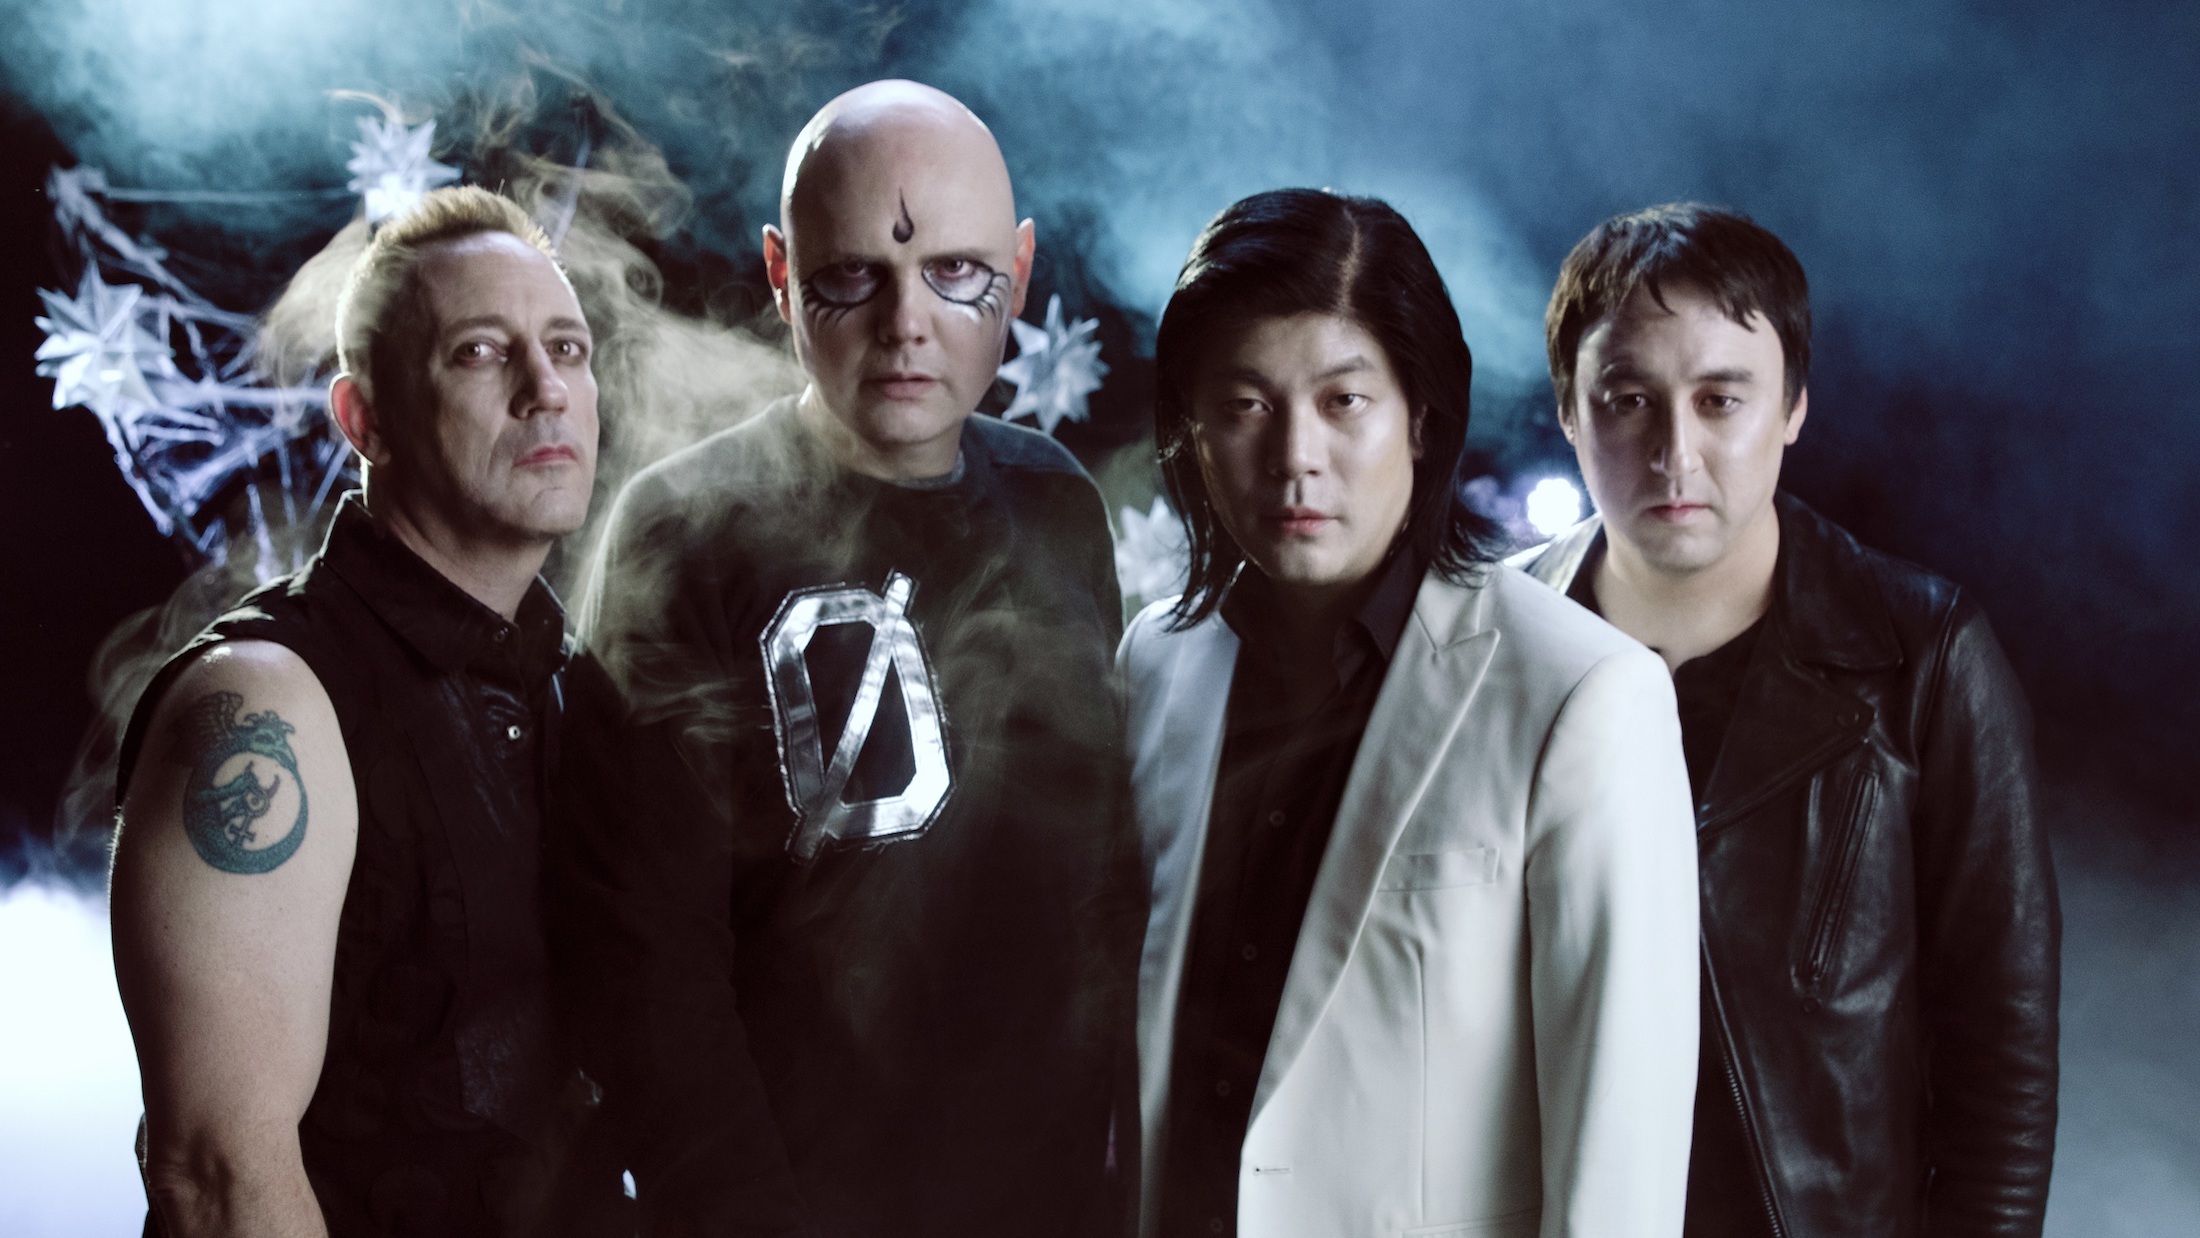 Smashing Pumpkins Say They're Happy Now. Can They Keep It Together